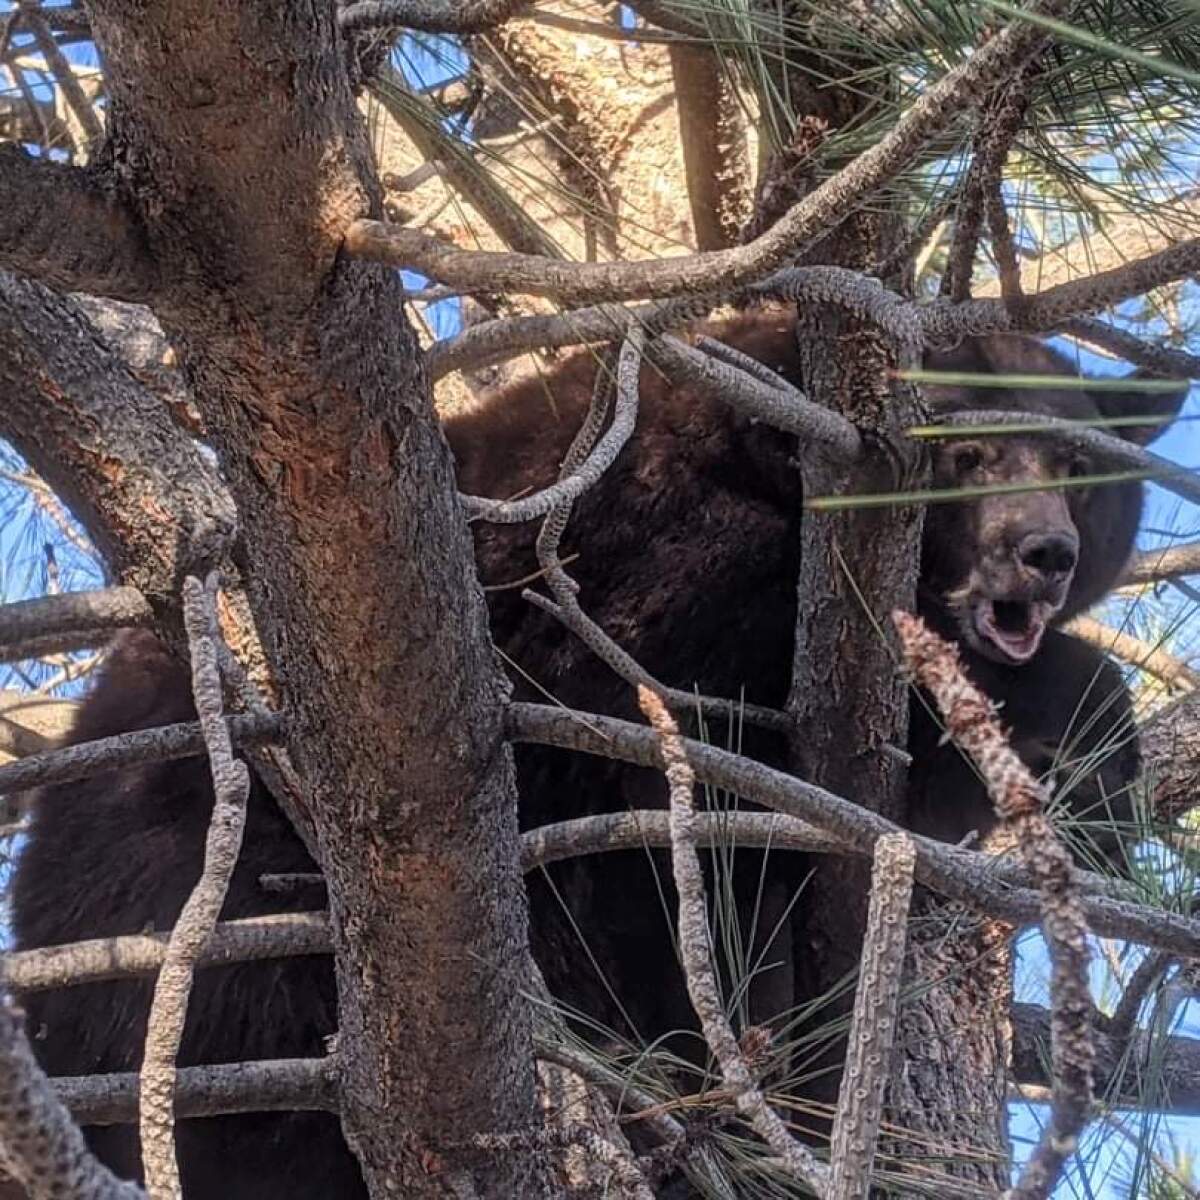 A black bear breaking into homes searching for food in a South Lake Tahoe neighborhood is photographed in a tree.